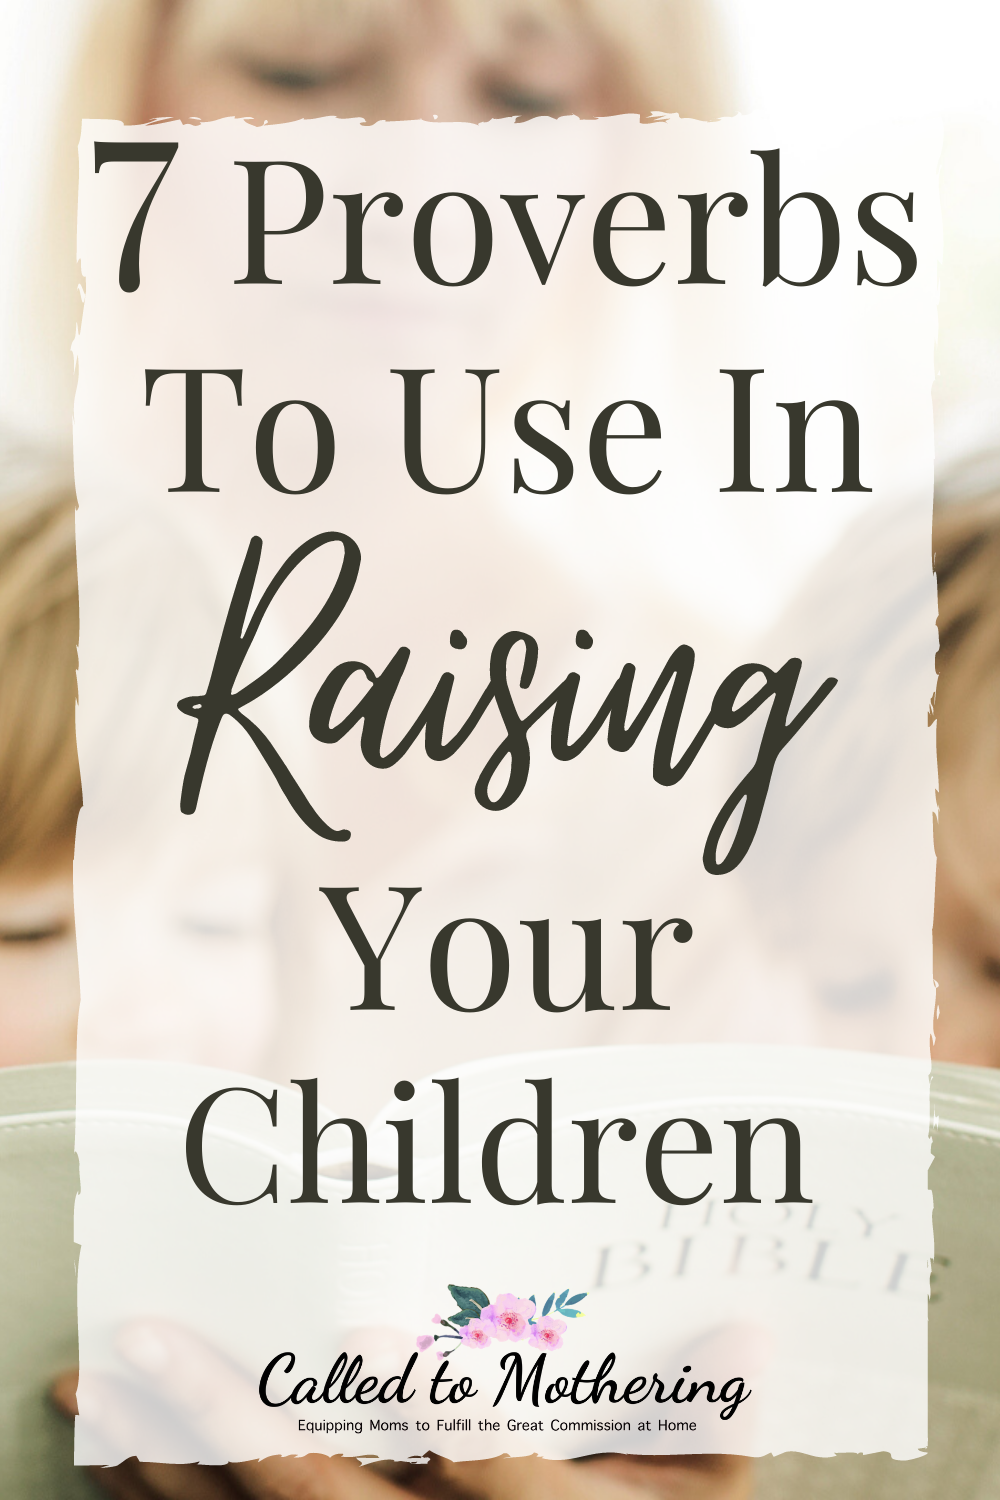 Seven proverbs from the Bible about parenting that will help you raise your children well. #raisingkids #christianparenting #childdiscipline